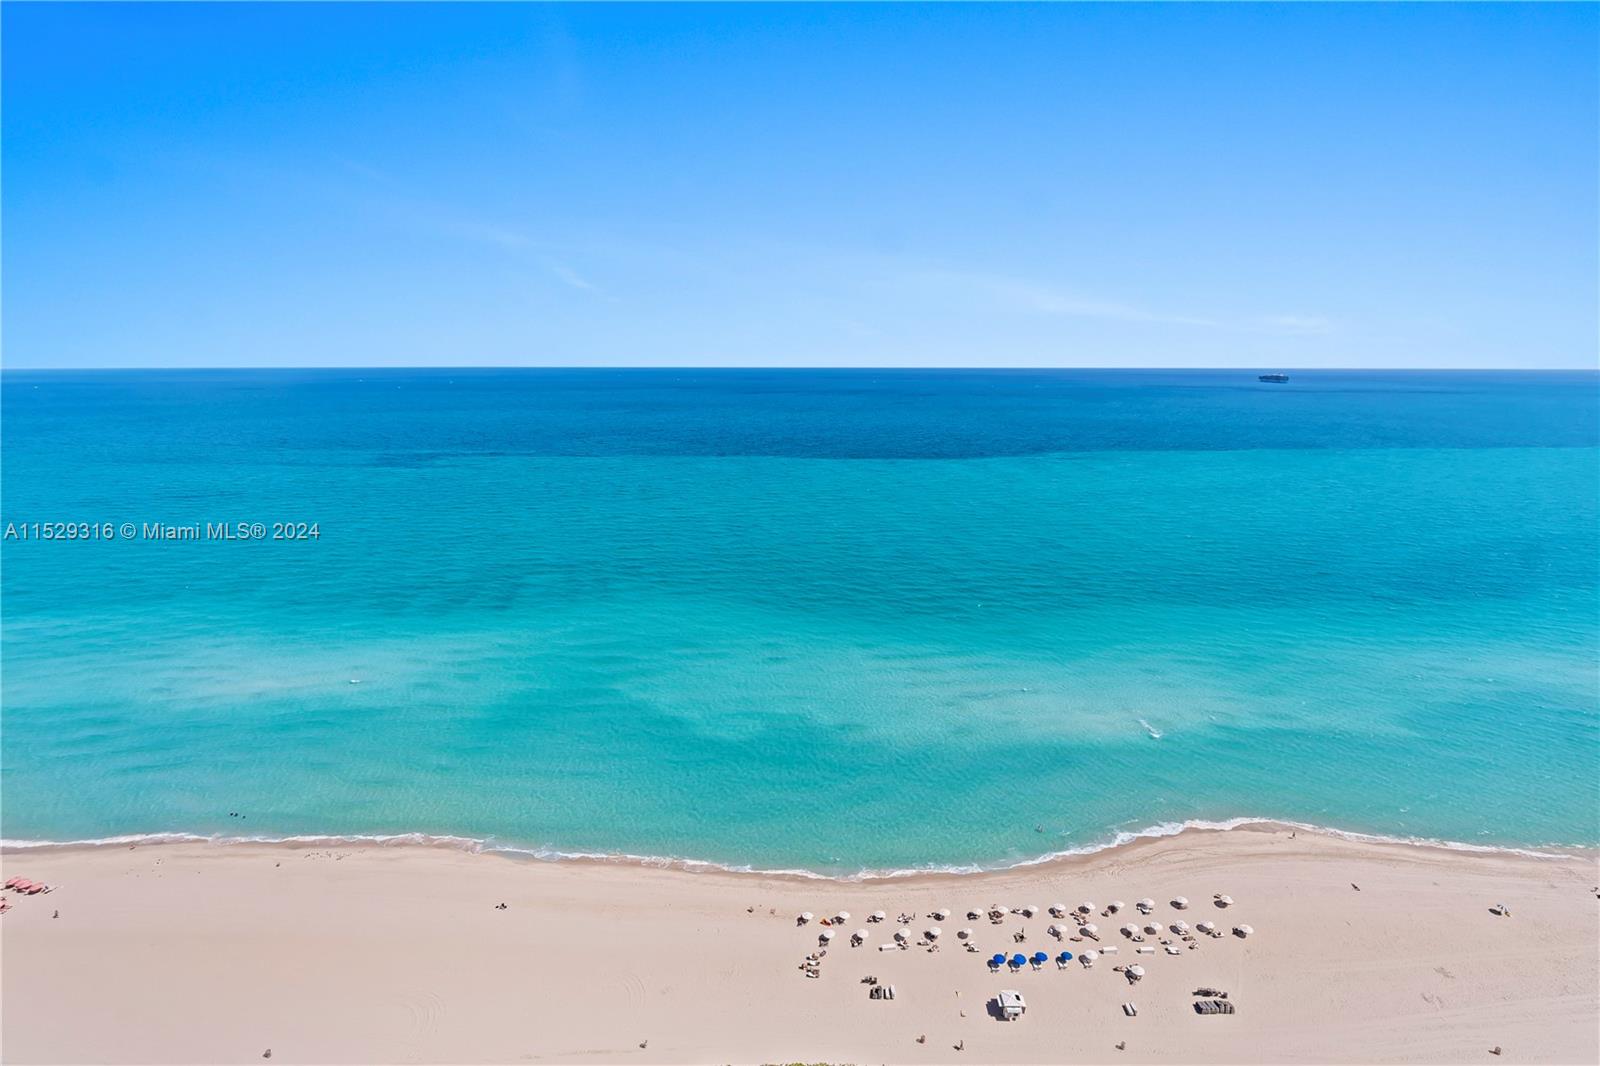 Enjoy breathtaking ocean, bay, and Miami skyline views in this 3BR/3BA SE corner unit on the 38th floor at the Blue Diamond. Features include a double-door entry, spacious living room, formal dining area, open eat in kitchen, marble floors, marble bathrooms w/ Jacuzzi tub, ample closet space, floor-to-ceiling windows, and 2 balconies. Direct ocean front cabana & second parking space also available for sale separately. The Blue Diamond offers 1st class amenities: 24hr security, valet, concierge, tennis, pool & towel service, cafe/market w/room service, a 16,000sf oceanside clubhouse/spa, gym, personal trainers, free workout classes, steam/ saunas, hot tubs, nursery, playroom, billiards, business center, beach attendant, and more! Please click the virtual tour link to see video of property.